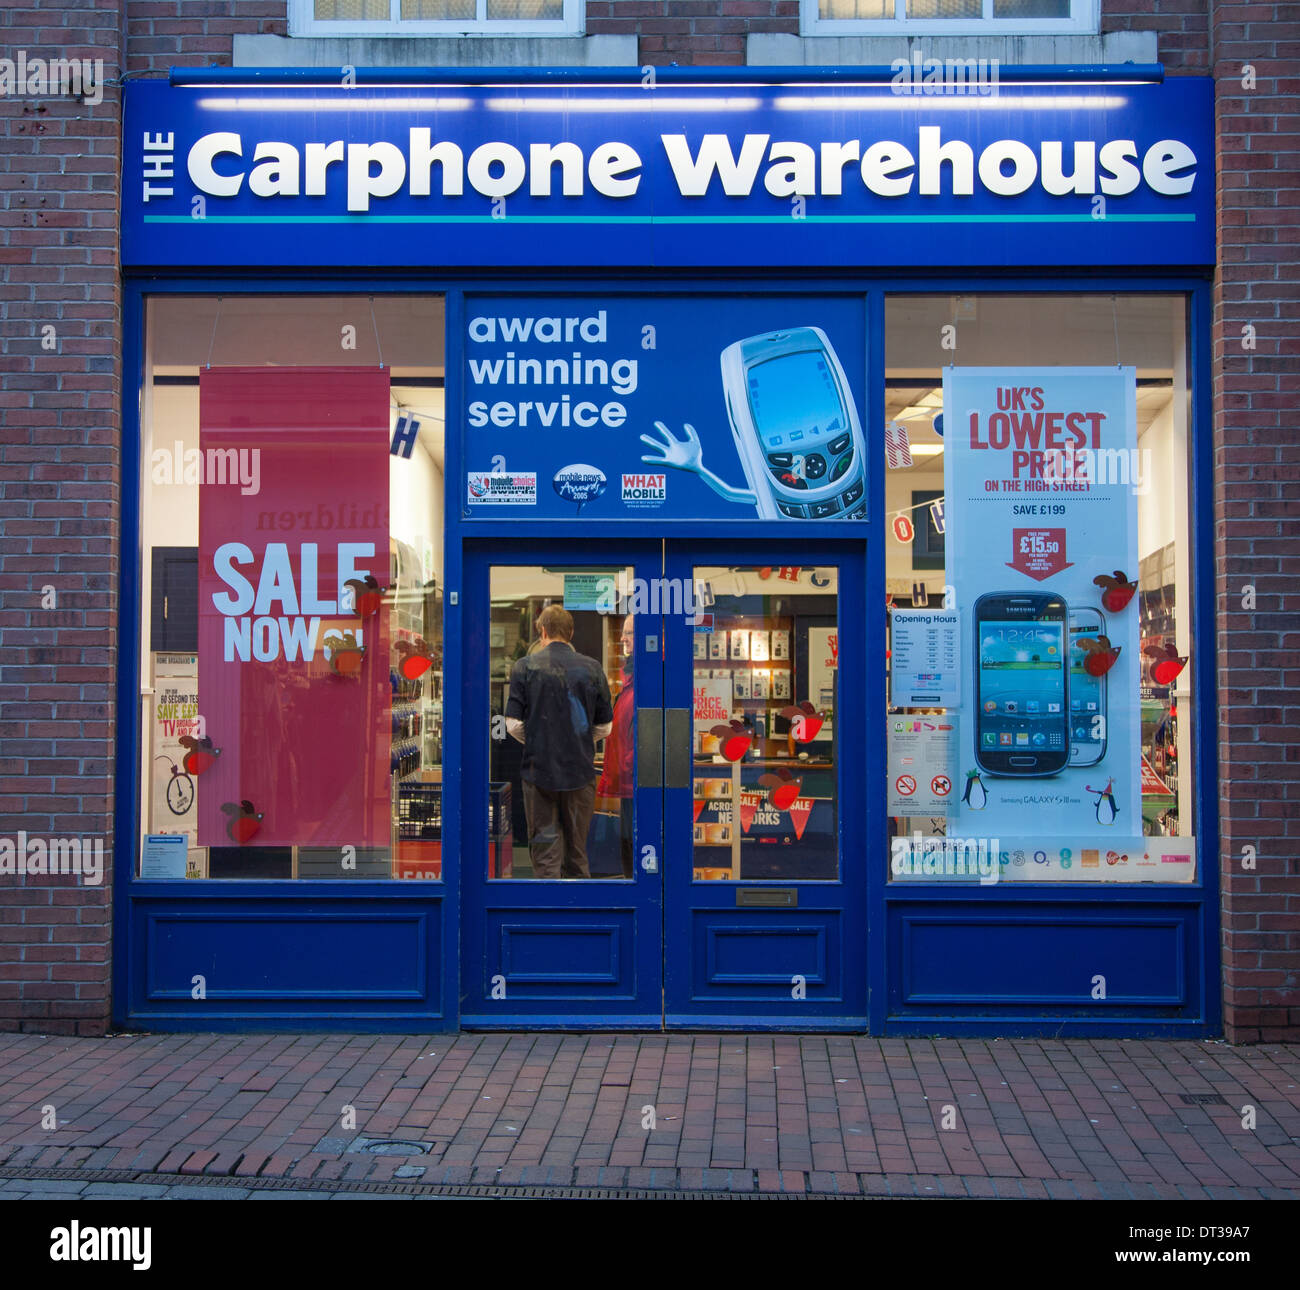 Sign on the front frontage or facade of the Carphone Warehouse shop or store in Macclesfield Cheshire England UK Stock Photo